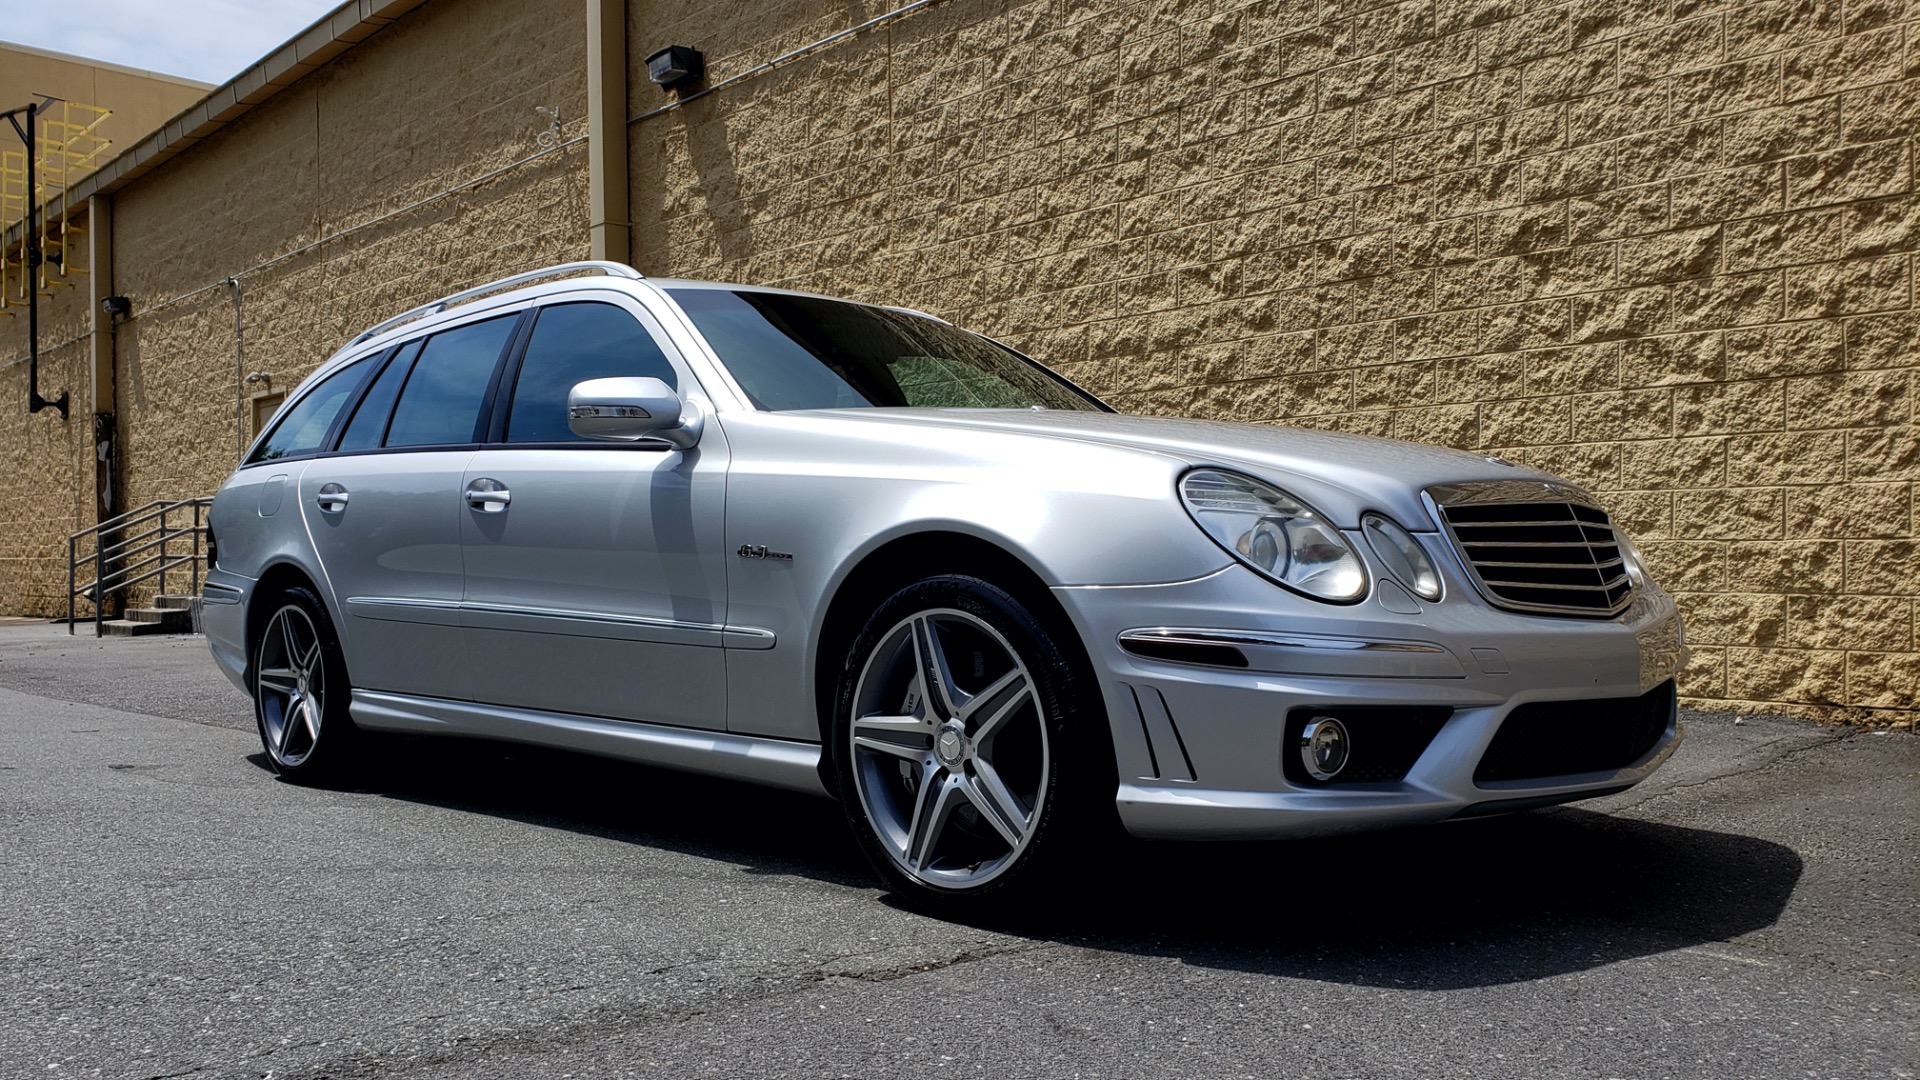 Used 2007 Mercedes-Benz E-Class 6.3L AMG for sale Sold at Formula Imports in Charlotte NC 28227 4